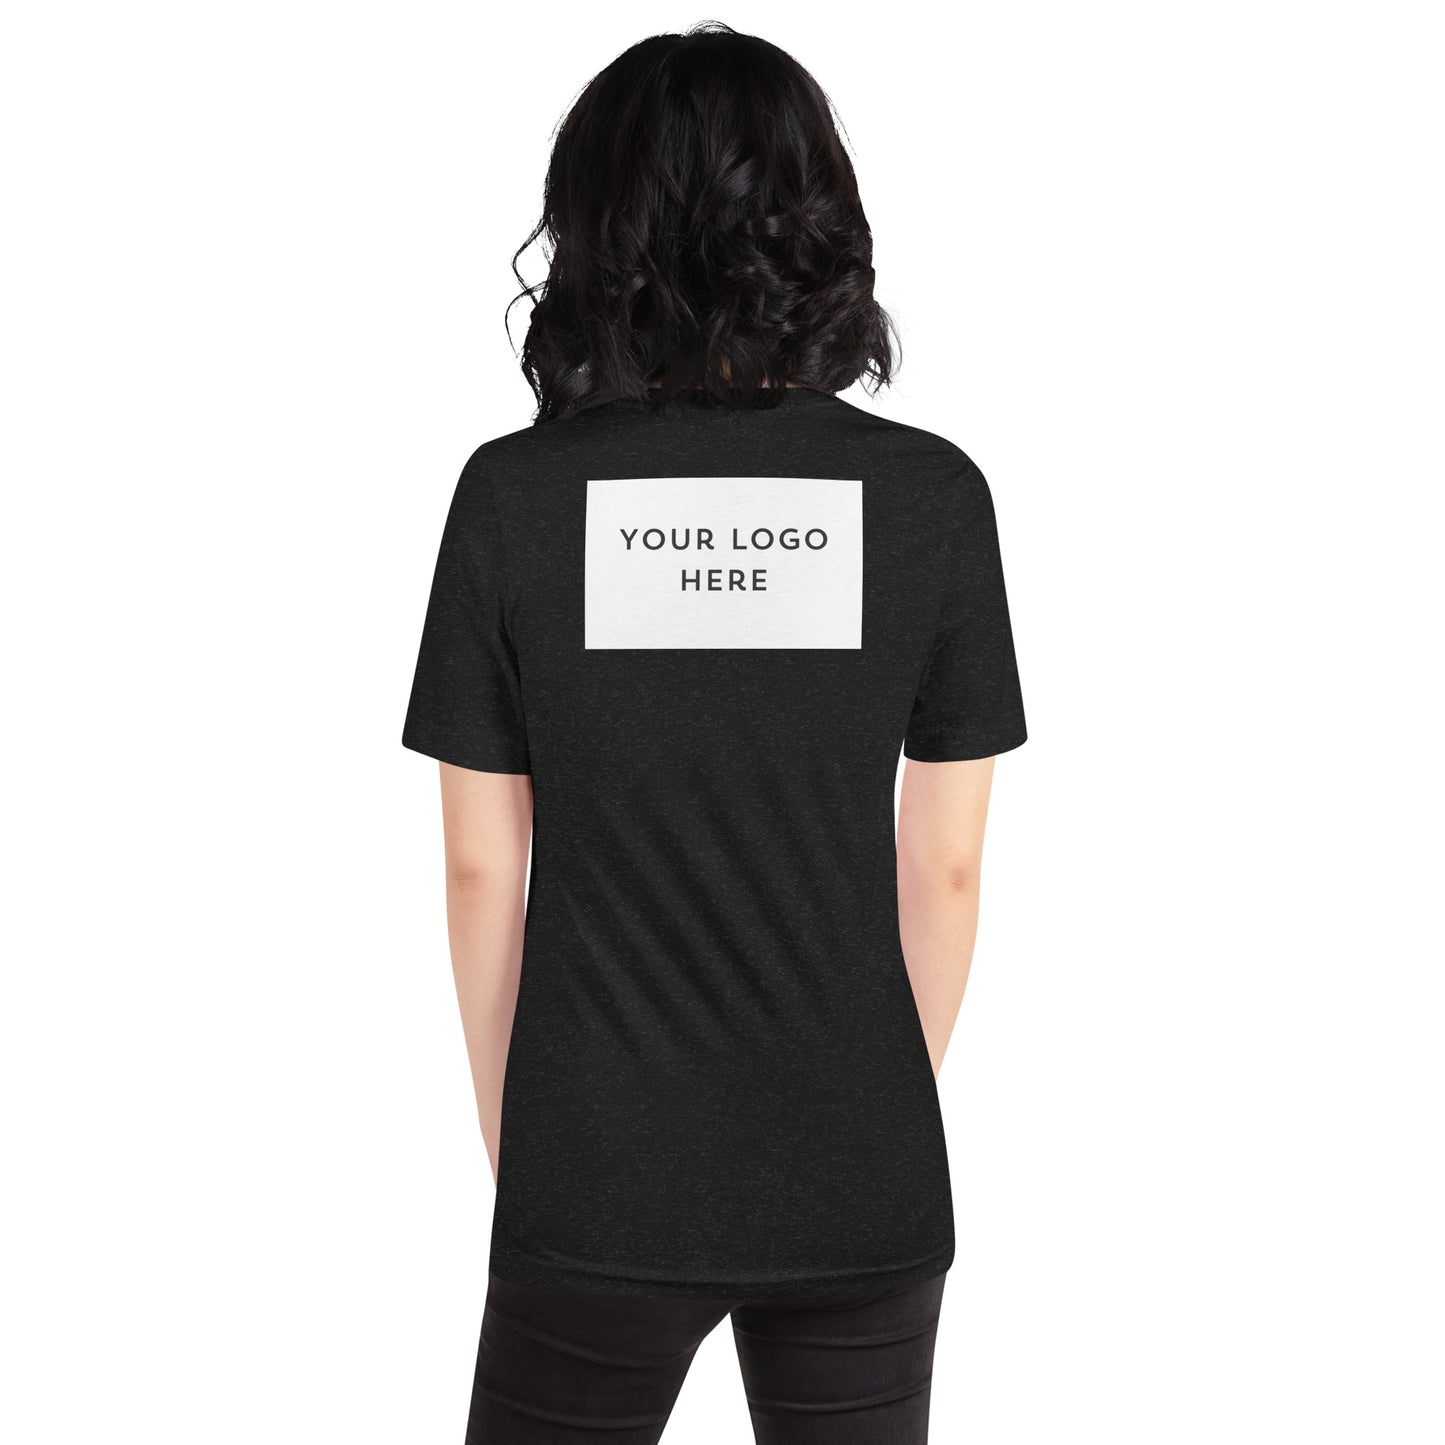 "Only on Main Street" (Greenspaces) Customizable Unisex T-shirt